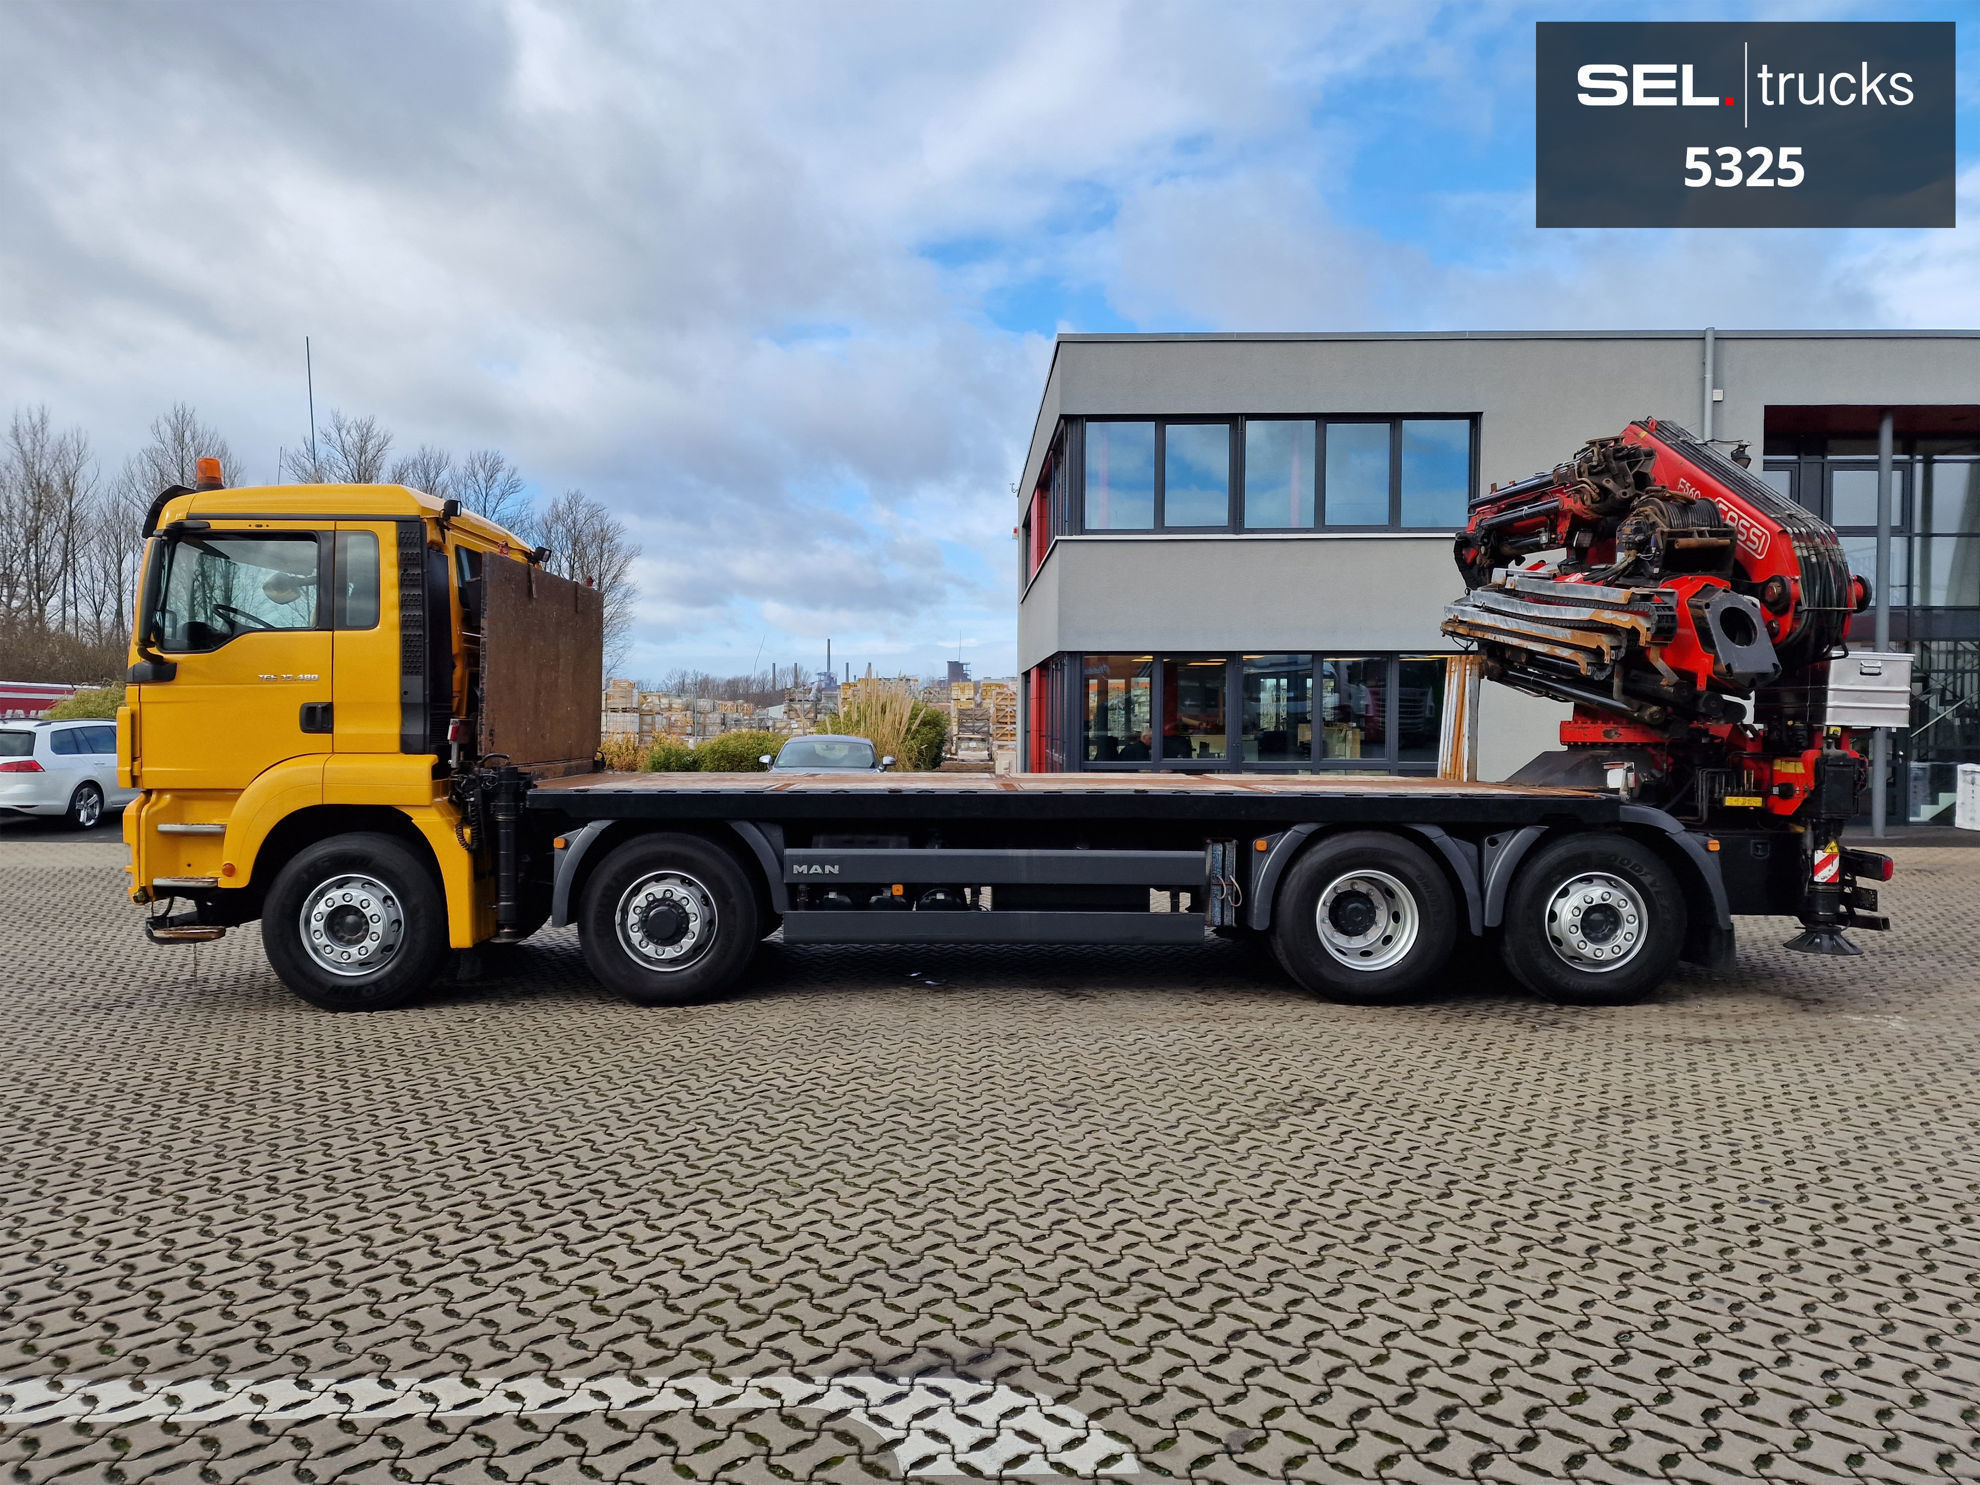 MAN TGS 35.480 8X4H-6 BL Truck. SEL Trucks. Used trucks from Germany. Fast  & easy export service!